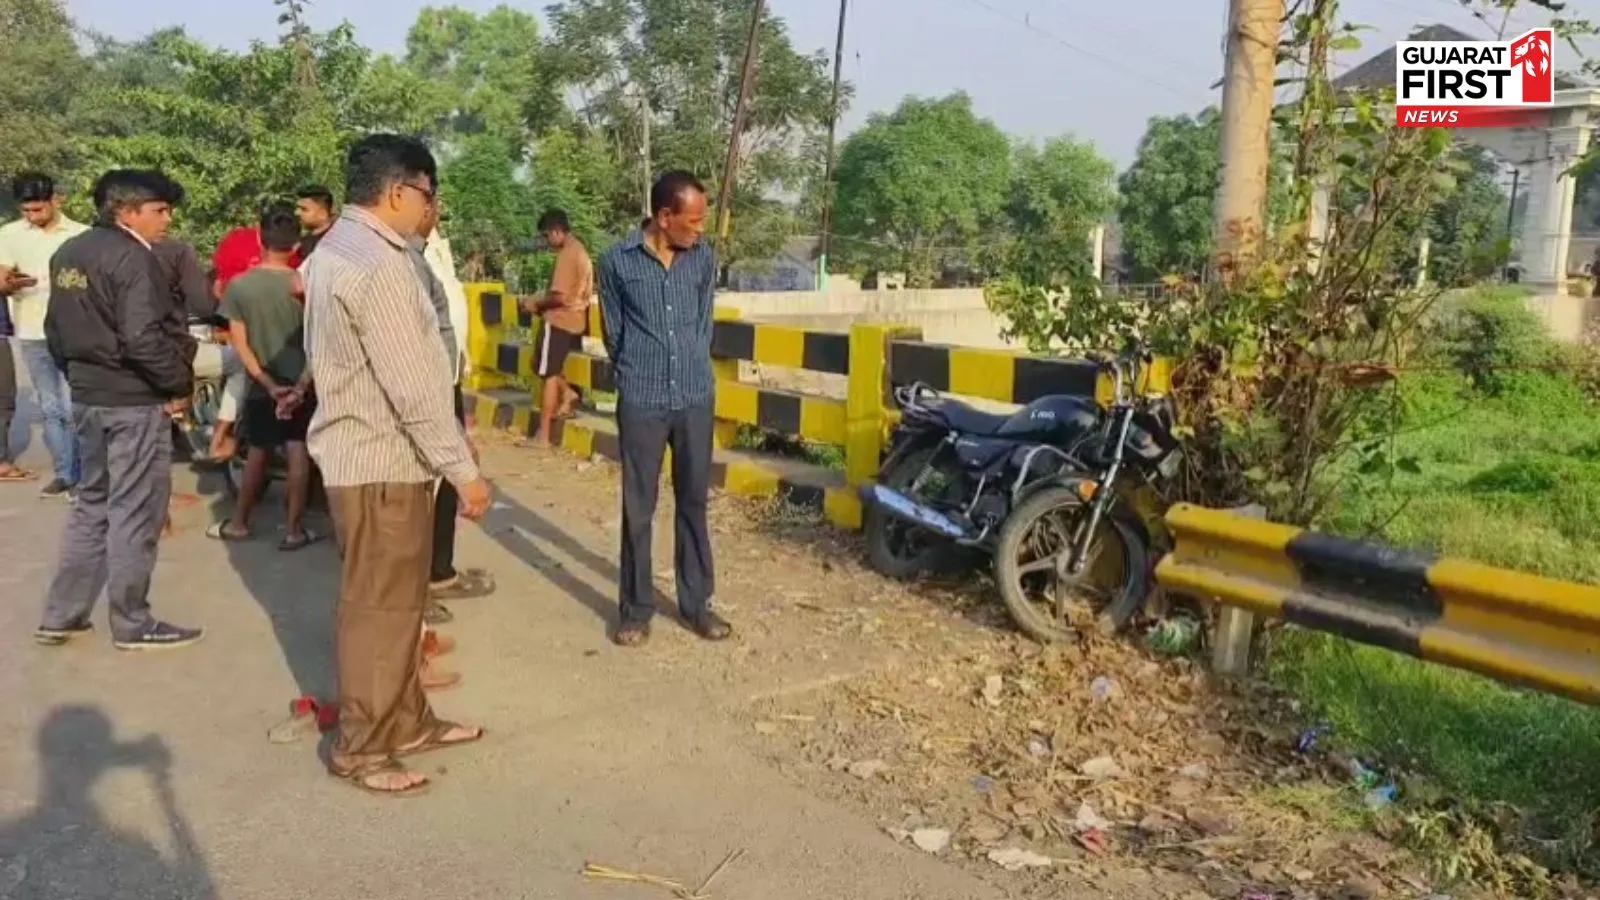 Surat: 2 youths died in an accident near Barasadi village of Palsana taluka